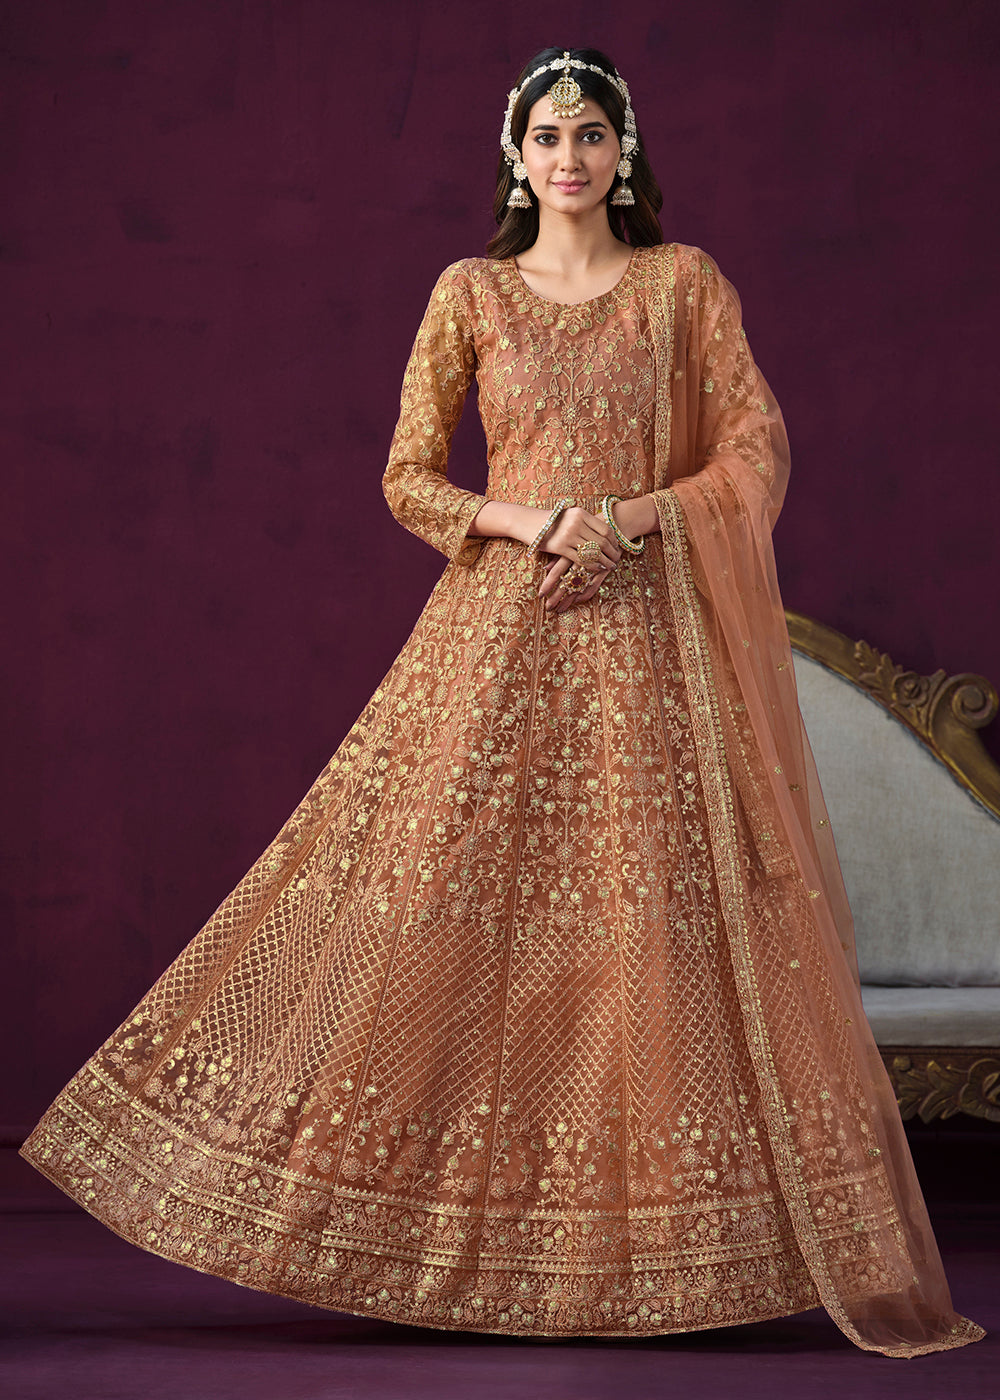 Buy Now Charming Orange Embroidered Net Floor Length Anarkali Suit Online in USA, UK, Australia, New Zealand, Canada & Worldwide at Empress Clothing.